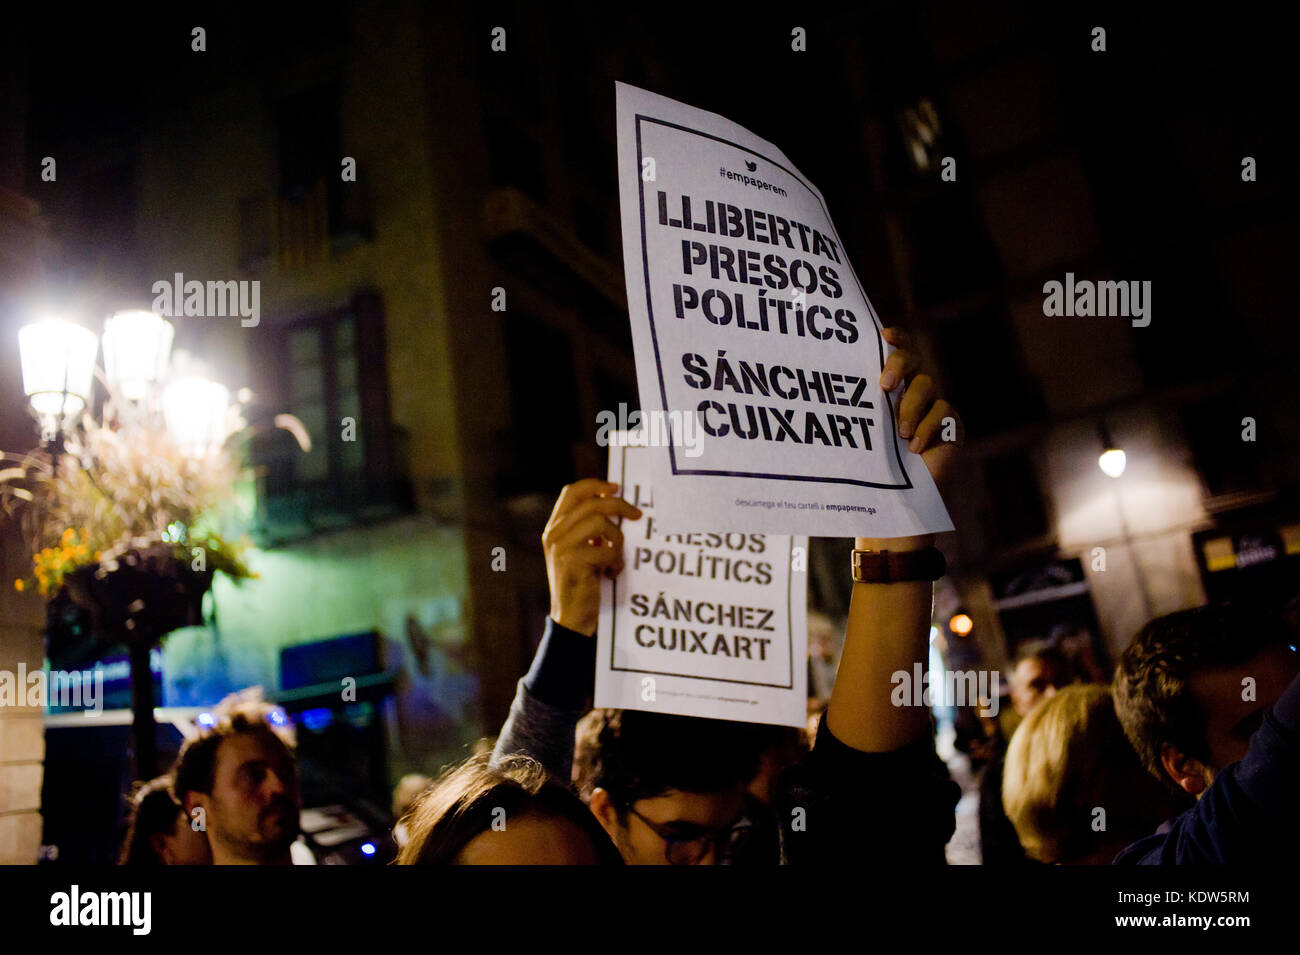 Barcelona, Spain. 16th Oct, 2017. In Barcelona people show posters reading 'freedom political prisoners Sanchez Cuixart' after Spain's High Court has remanded two leaders of a Catalan separatist organization on suspicion of sedition. The leader of the Catalan National Assembly (ANC), Jordi Sanchez, and Jordi Cuixart of the Omnium Cultural group were jailed on Monday after questioning. Credit: Jordi Boixareu/Alamy Live News Stock Photo